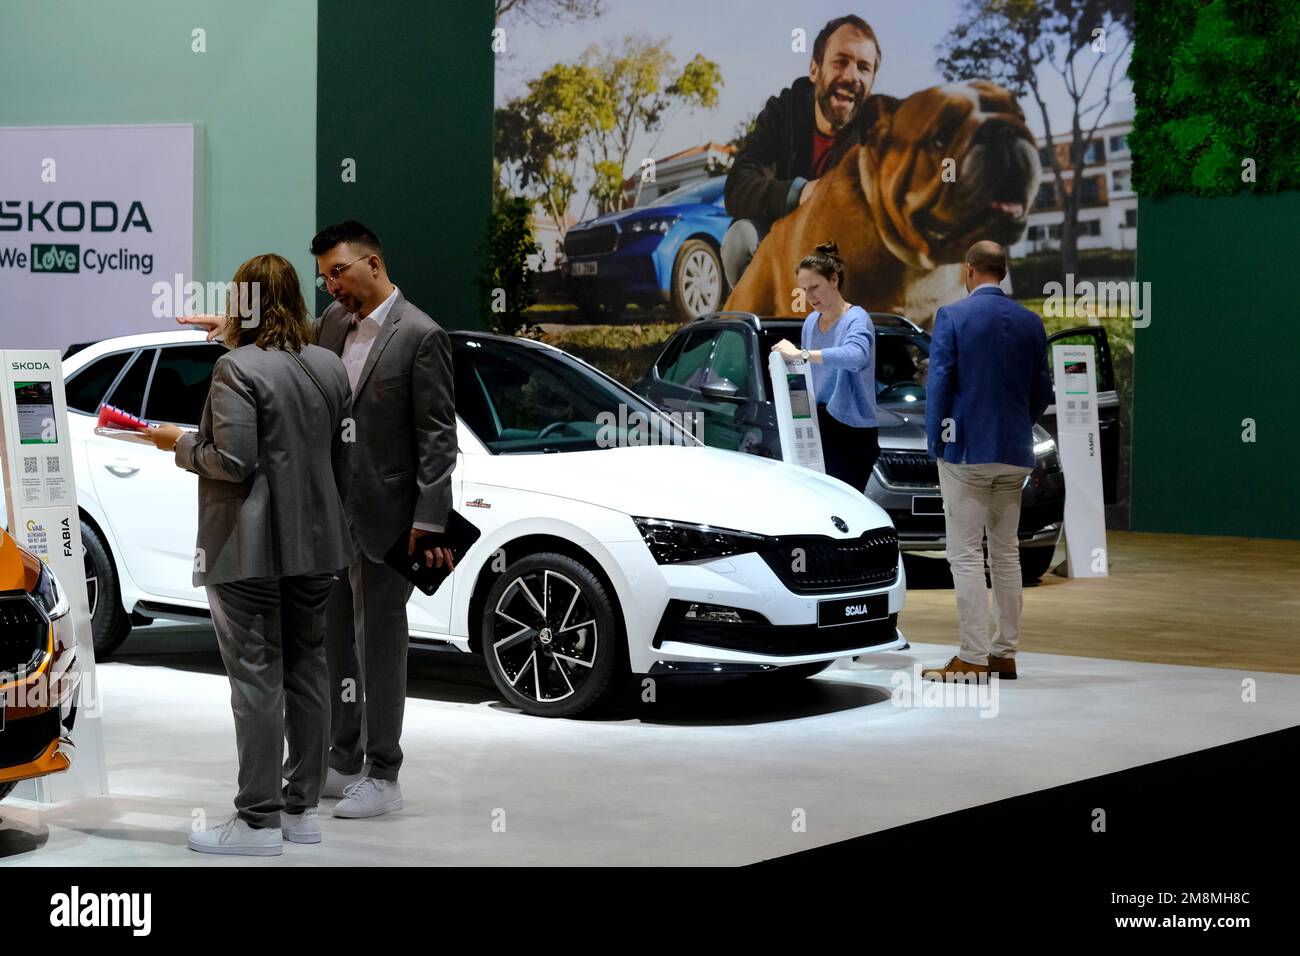 Brussels, Belgium. 13th Jan, 2023. Skoda car on display during the opening of the Brussels Motor Show at the Expo in Brussels, Belgium on Jan. 13, 2023. Credit: ALEXANDROS MICHAILIDIS/Alamy Live News Stock Photo